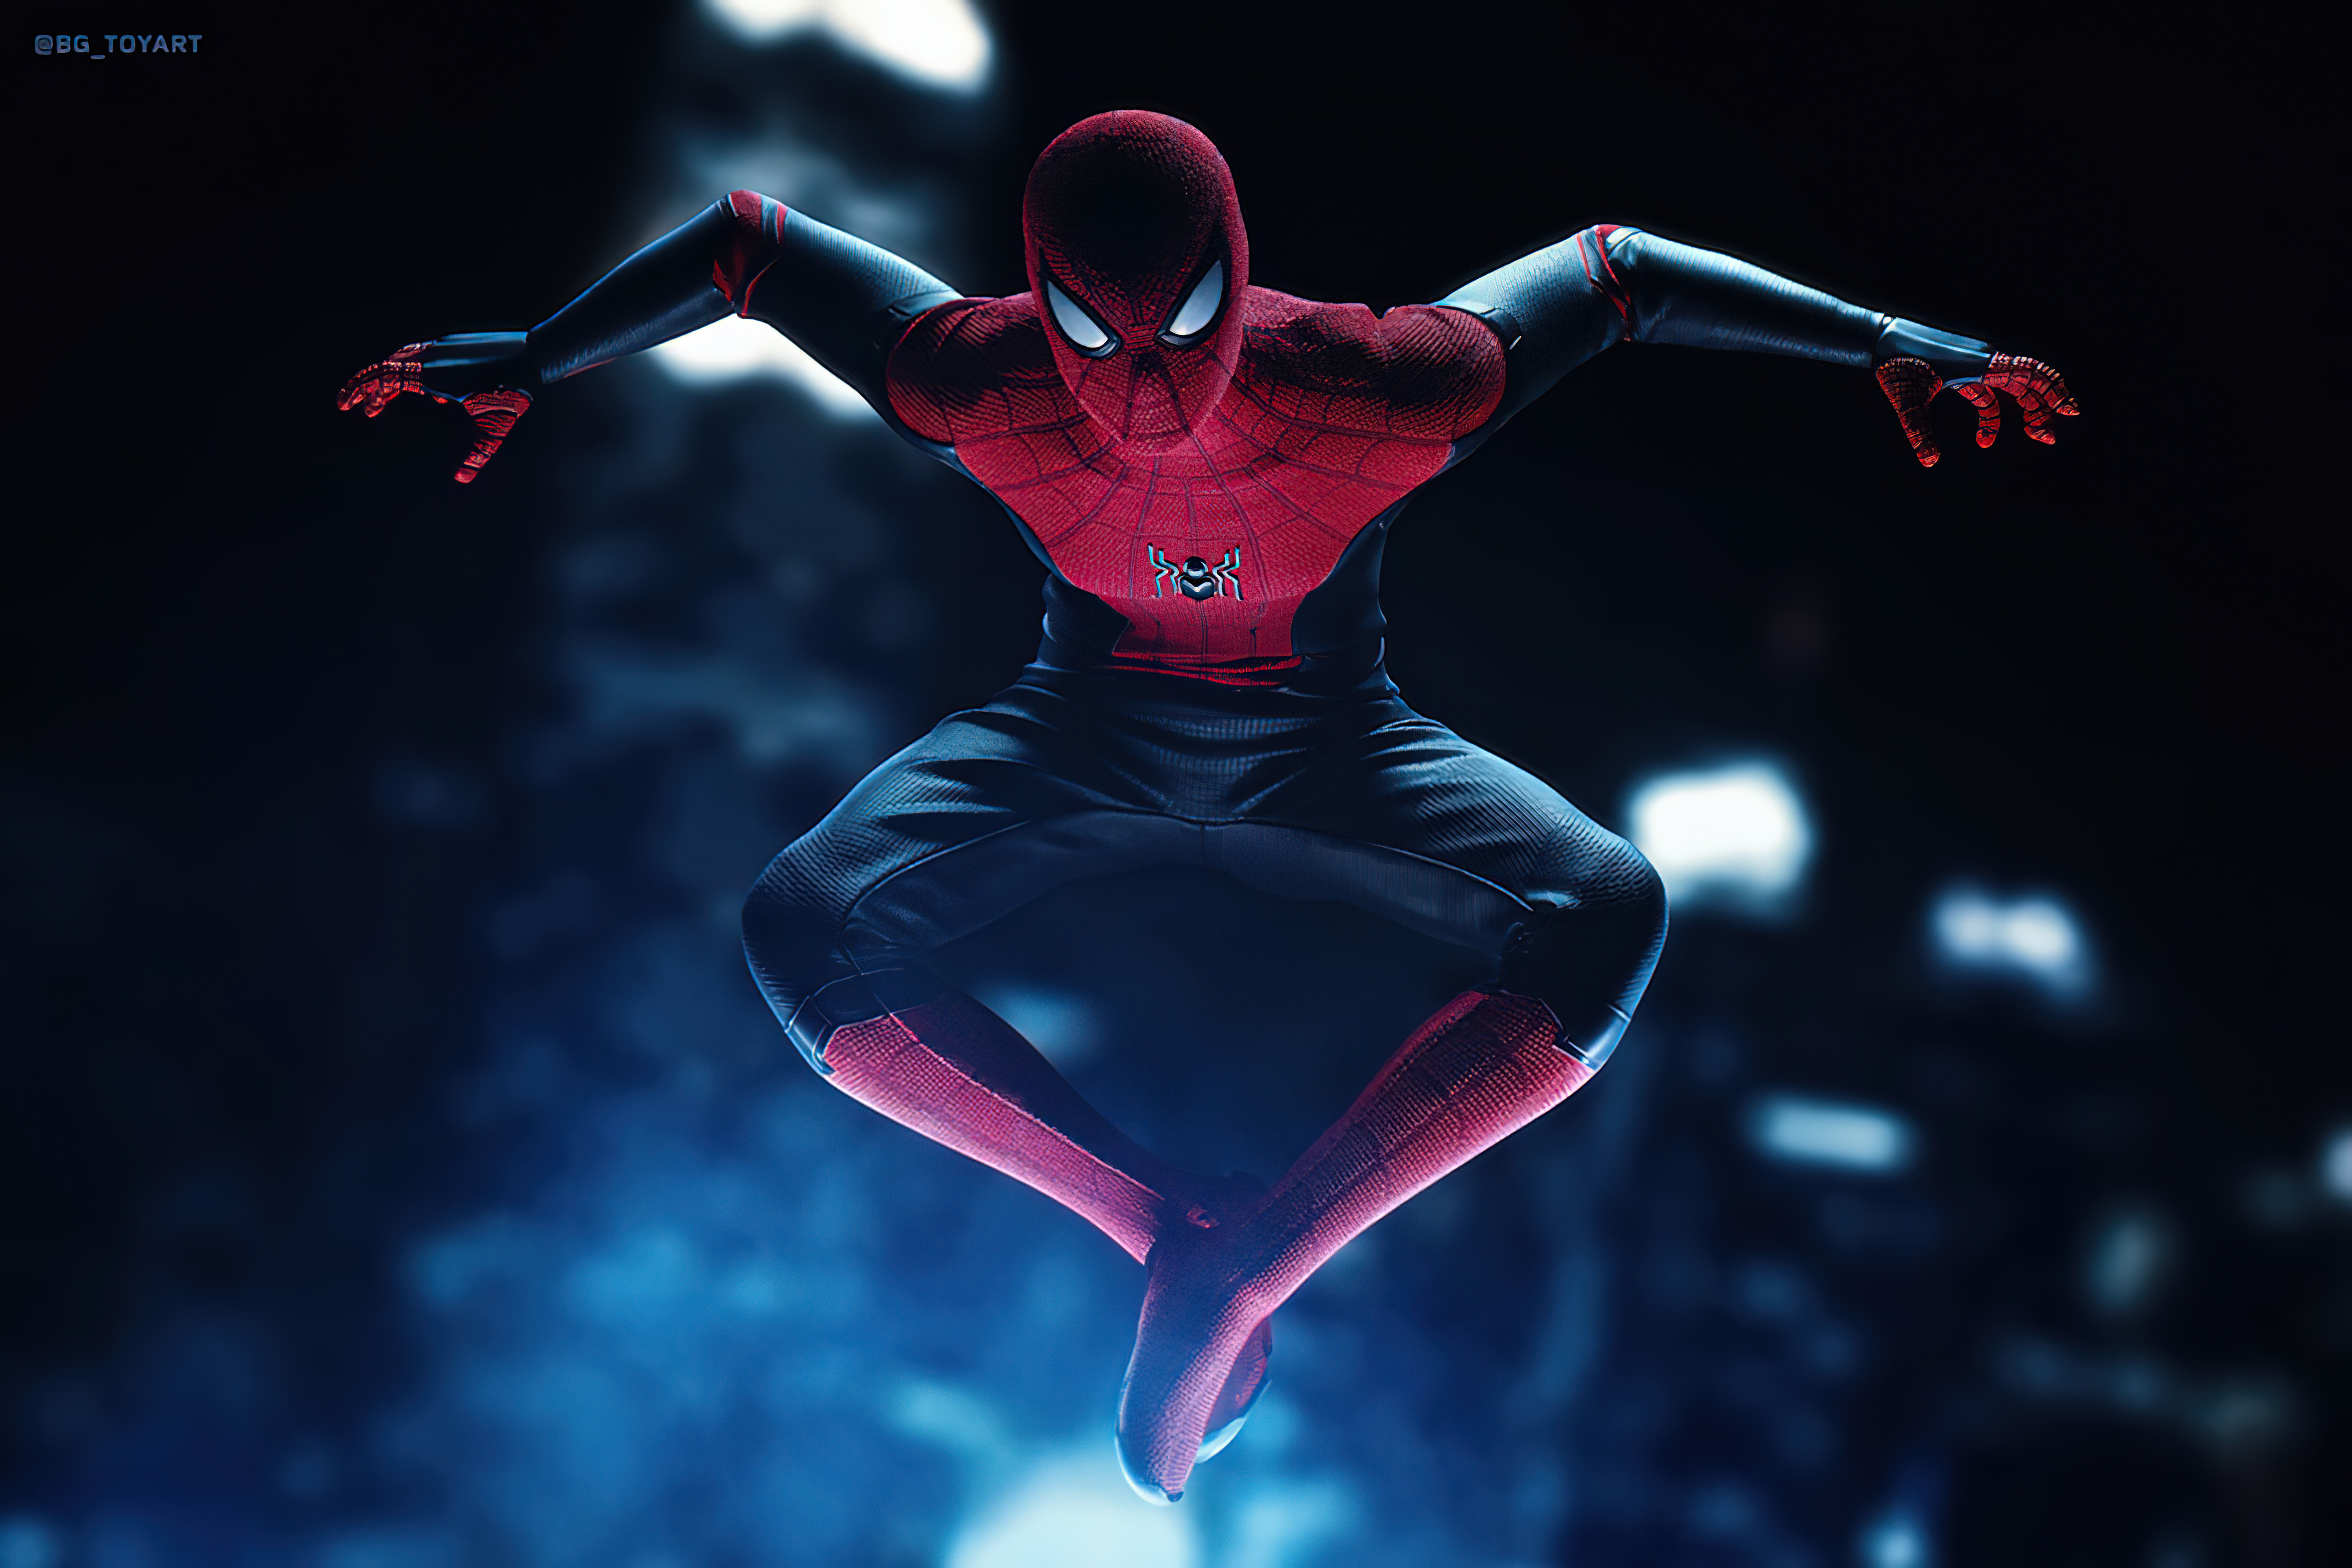 Wallpaper ID 459068  Movie SpiderMan Into The SpiderVerse Phone  Wallpaper Superhero SpiderMan Peter Parker Movie Miles Morales  720x1280 free download